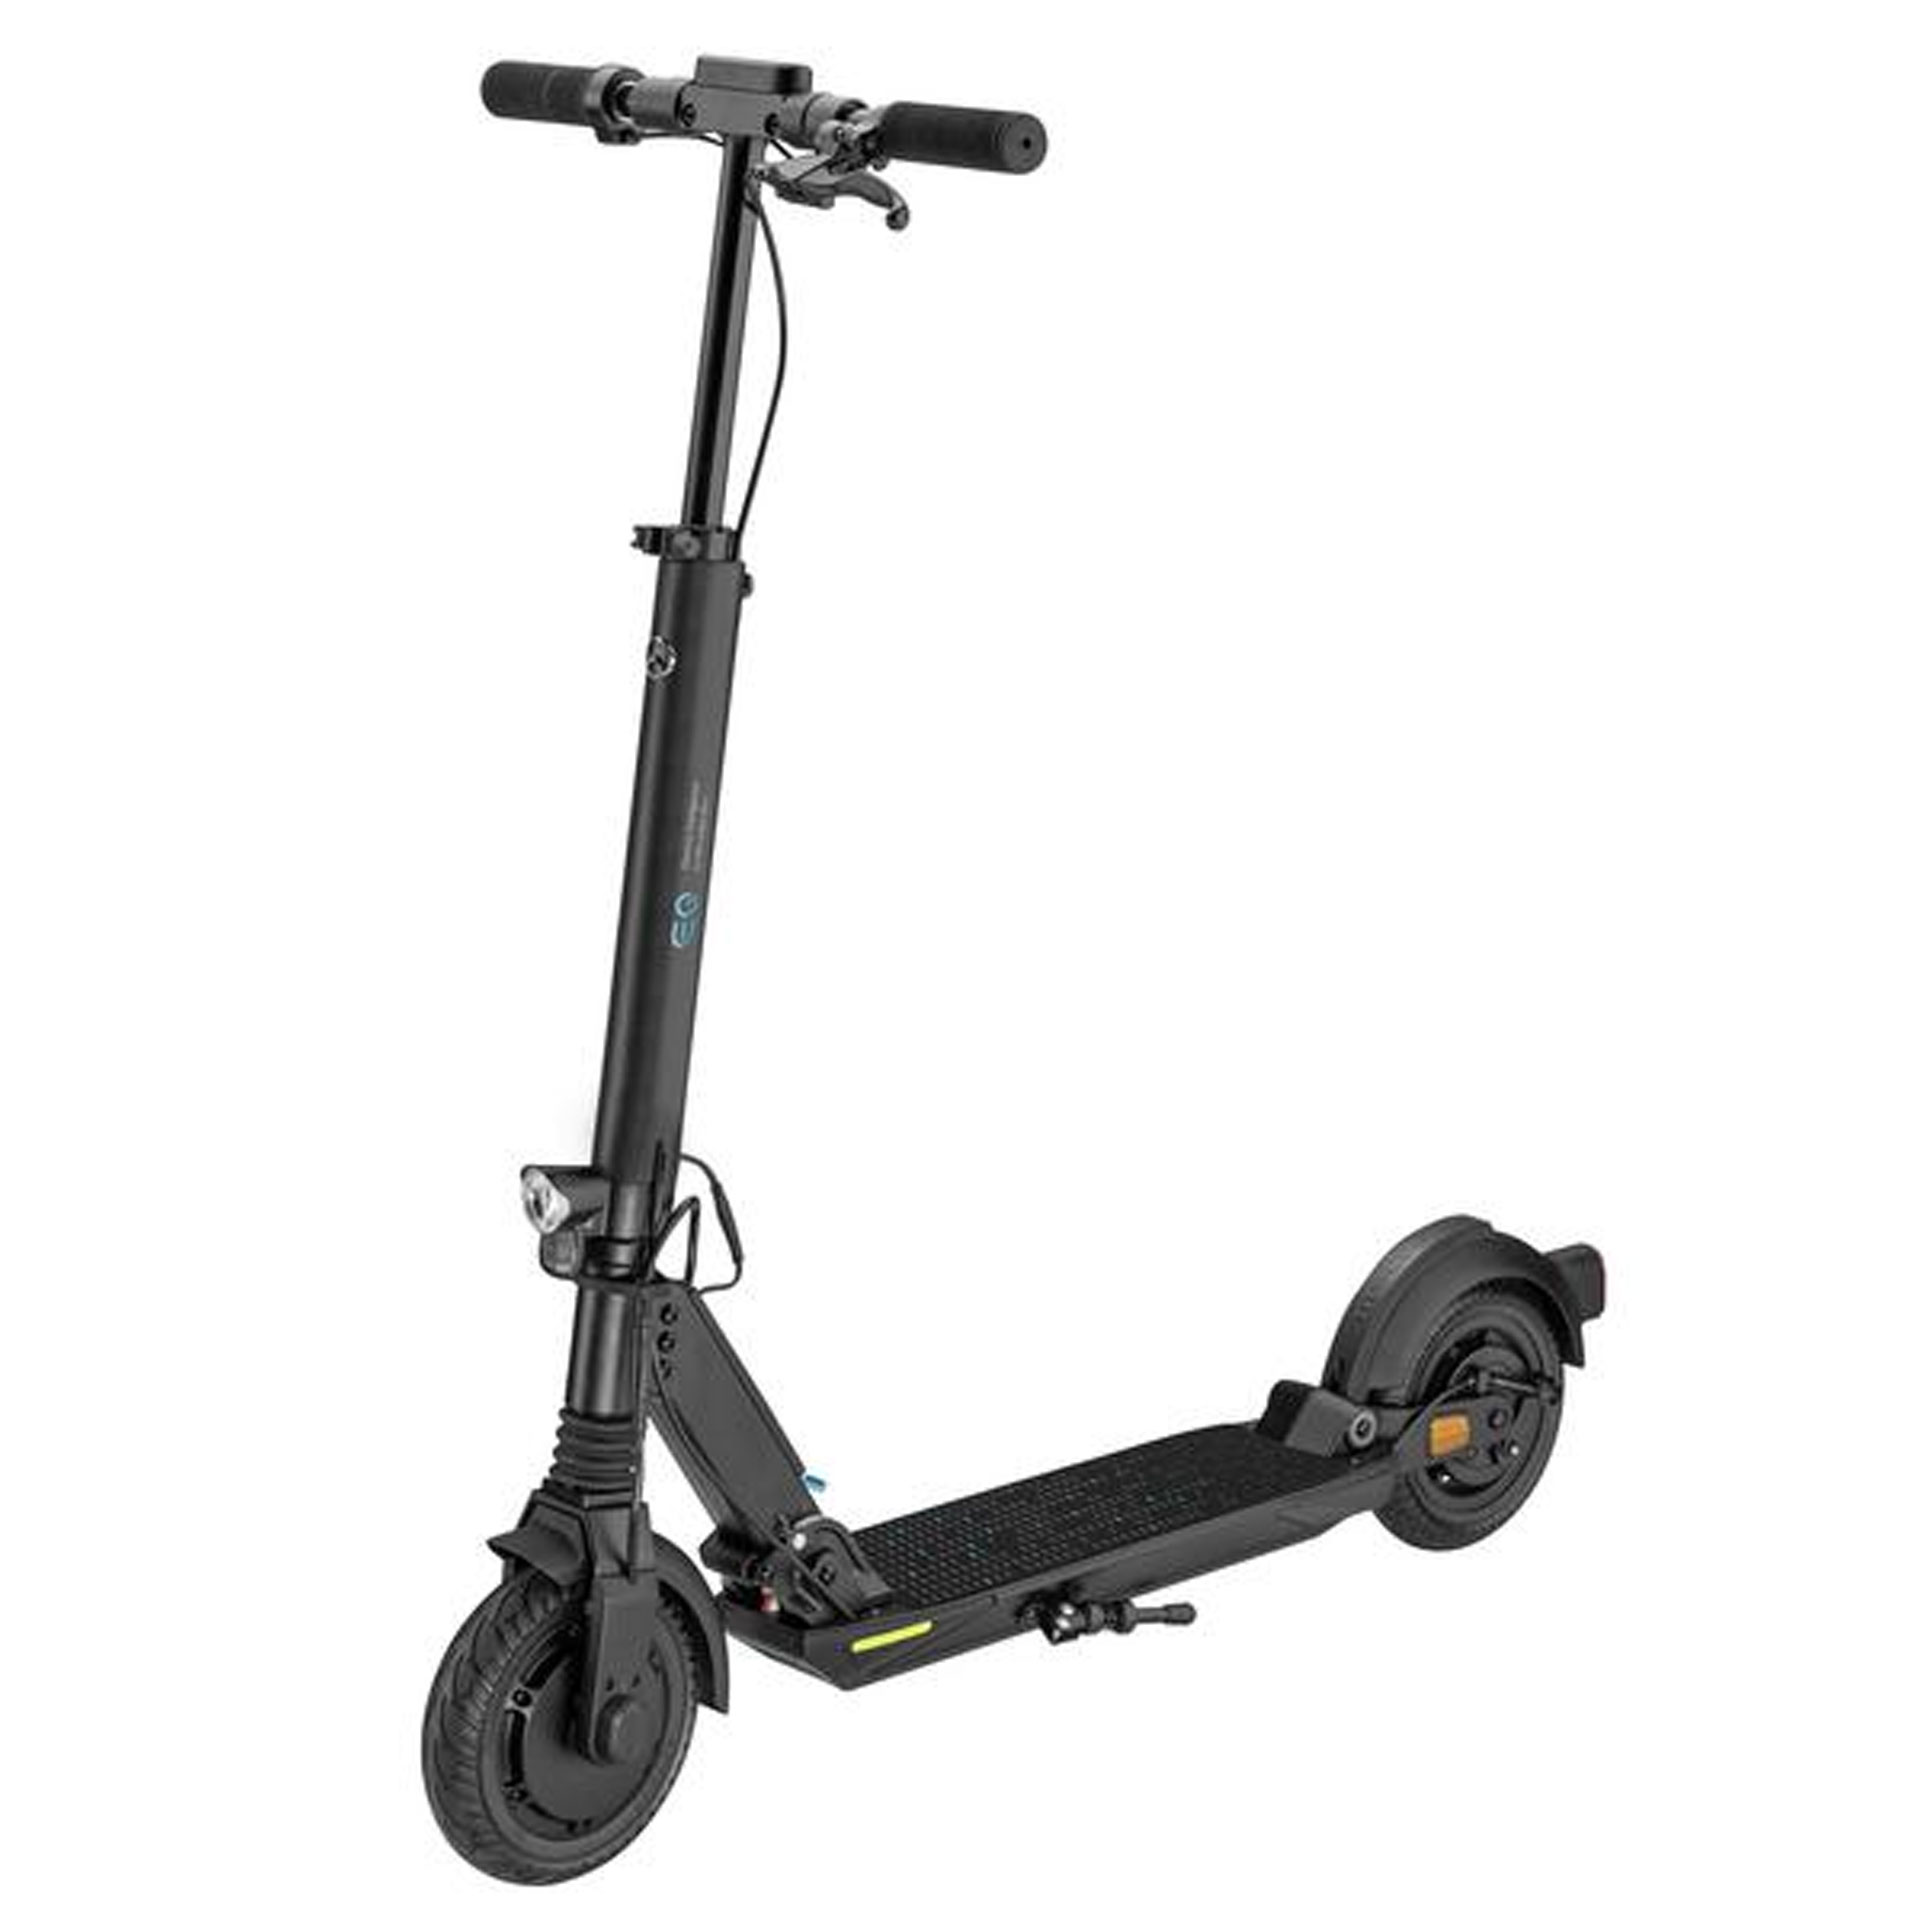 Mercedes-Benz E-Scooter by micro B66450199